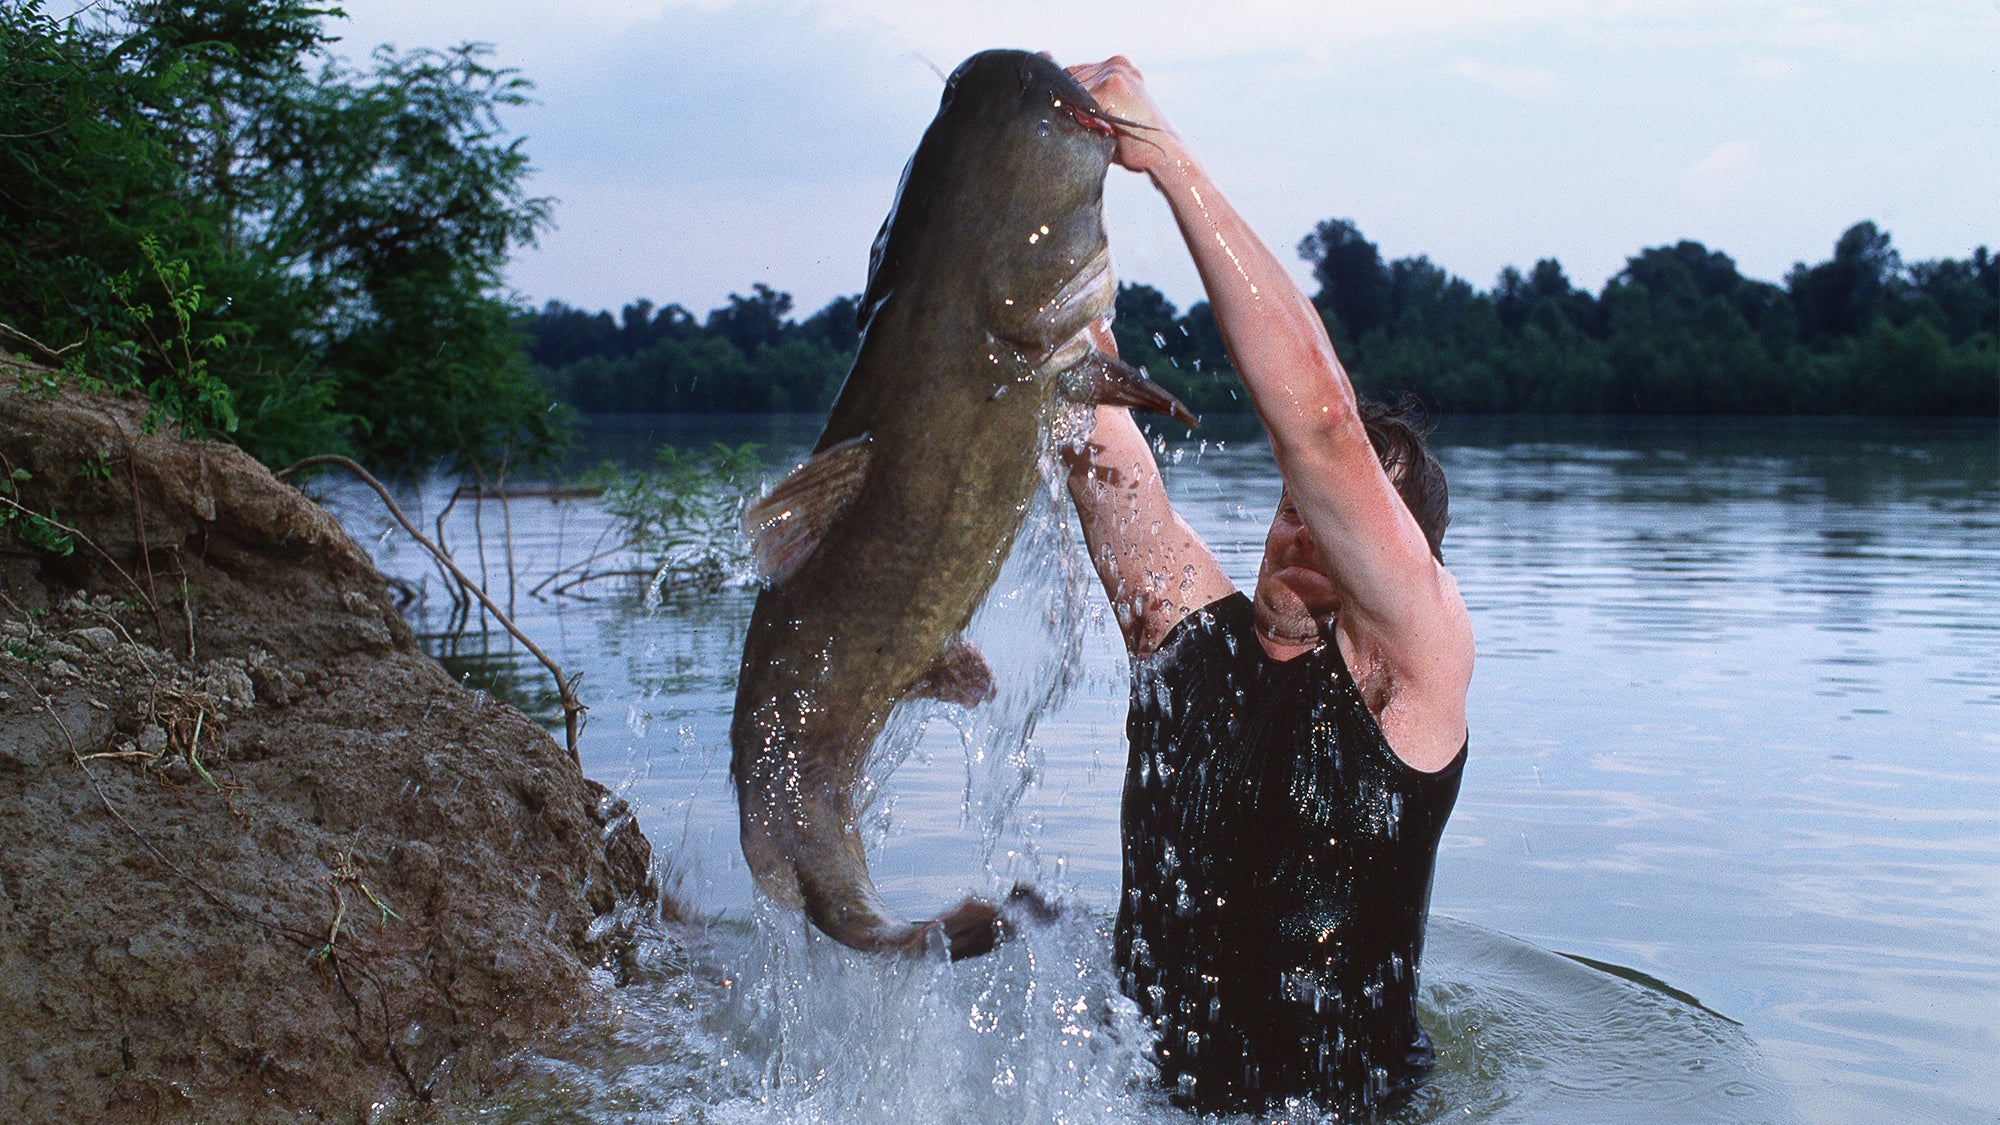 Woman Catches Big Fish with Hands